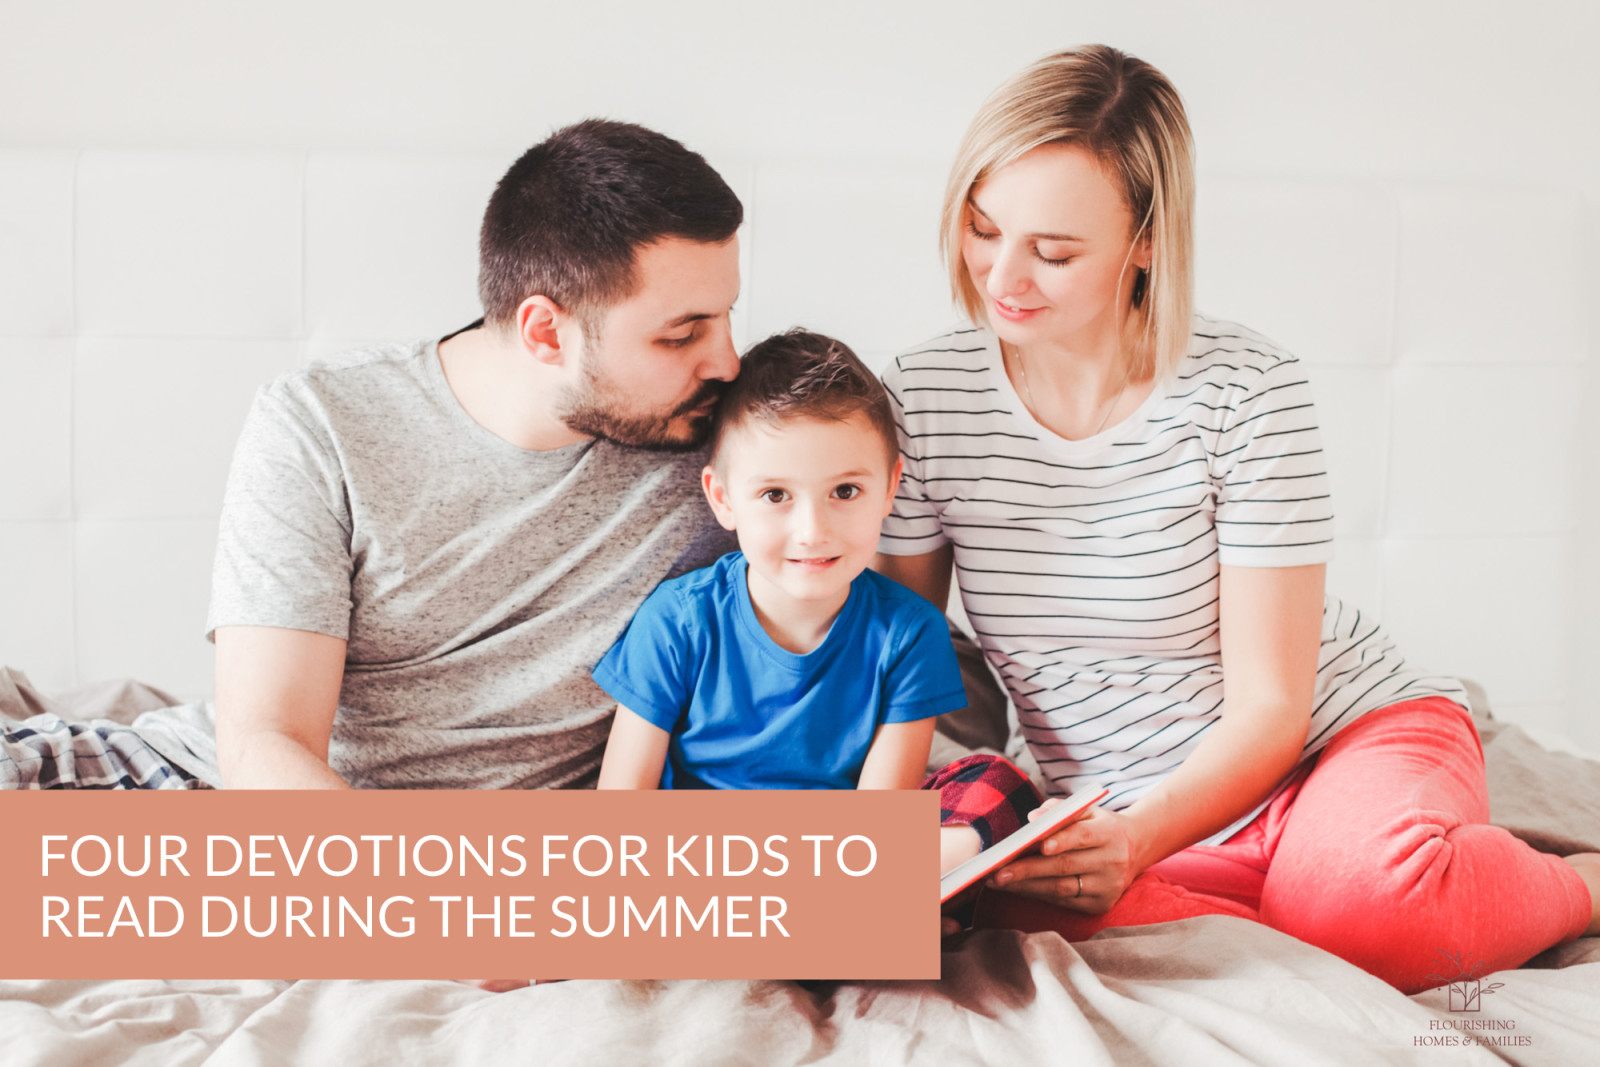 Four kids devotions to read over the summer + summer ritual ideas